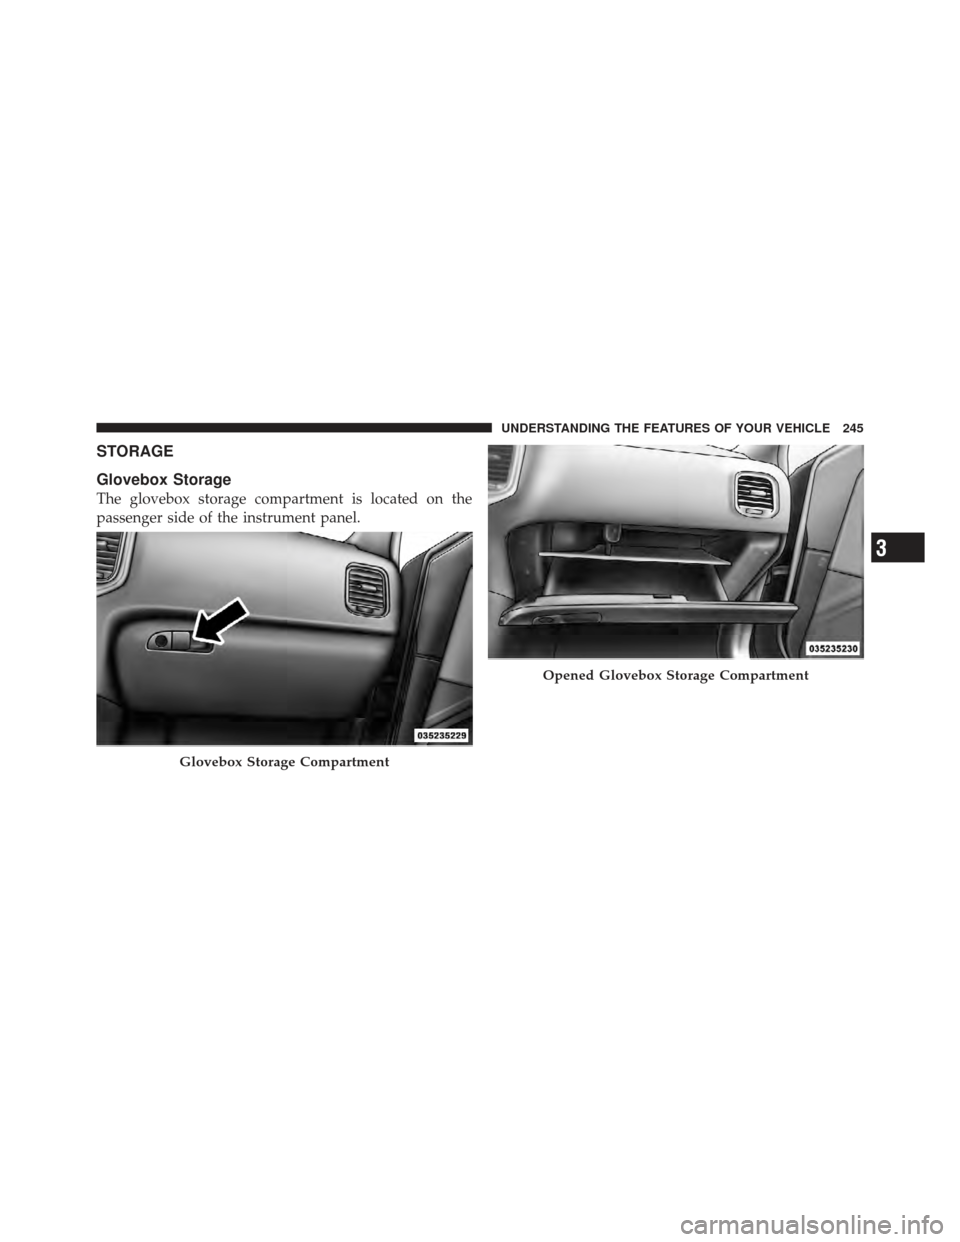 CHRYSLER 300 2011 2.G Owners Manual STORAGE
Glovebox Storage
The glovebox storage compartment is located on the
passenger side of the instrument panel.
Glovebox Storage Compartment
Opened Glovebox Storage Compartment
3
UNDERSTANDING THE